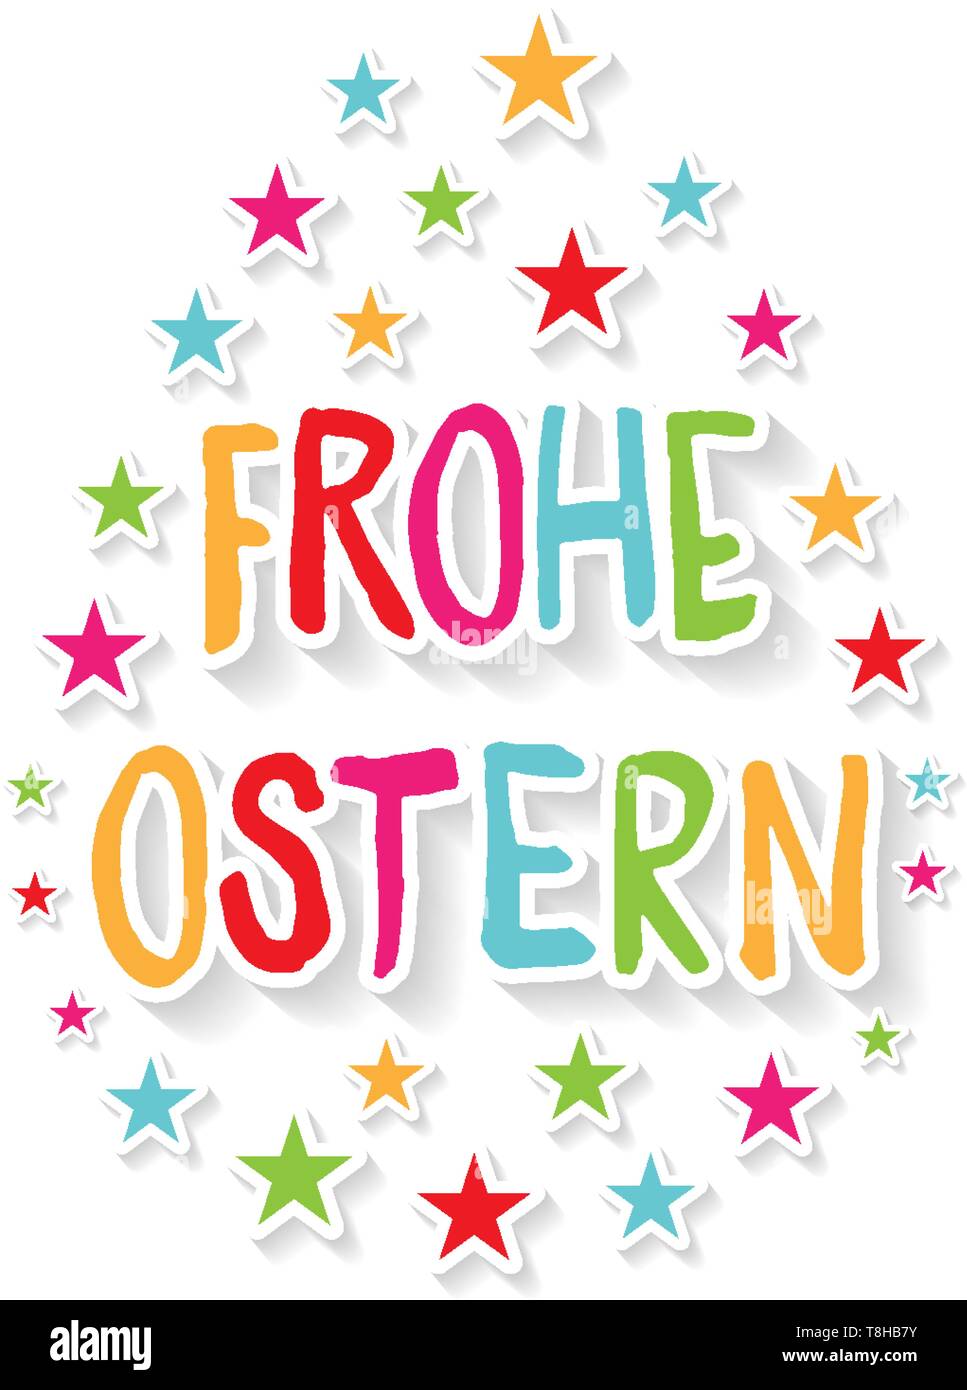 Frohe Ostern german easter vector egg Stock Vector